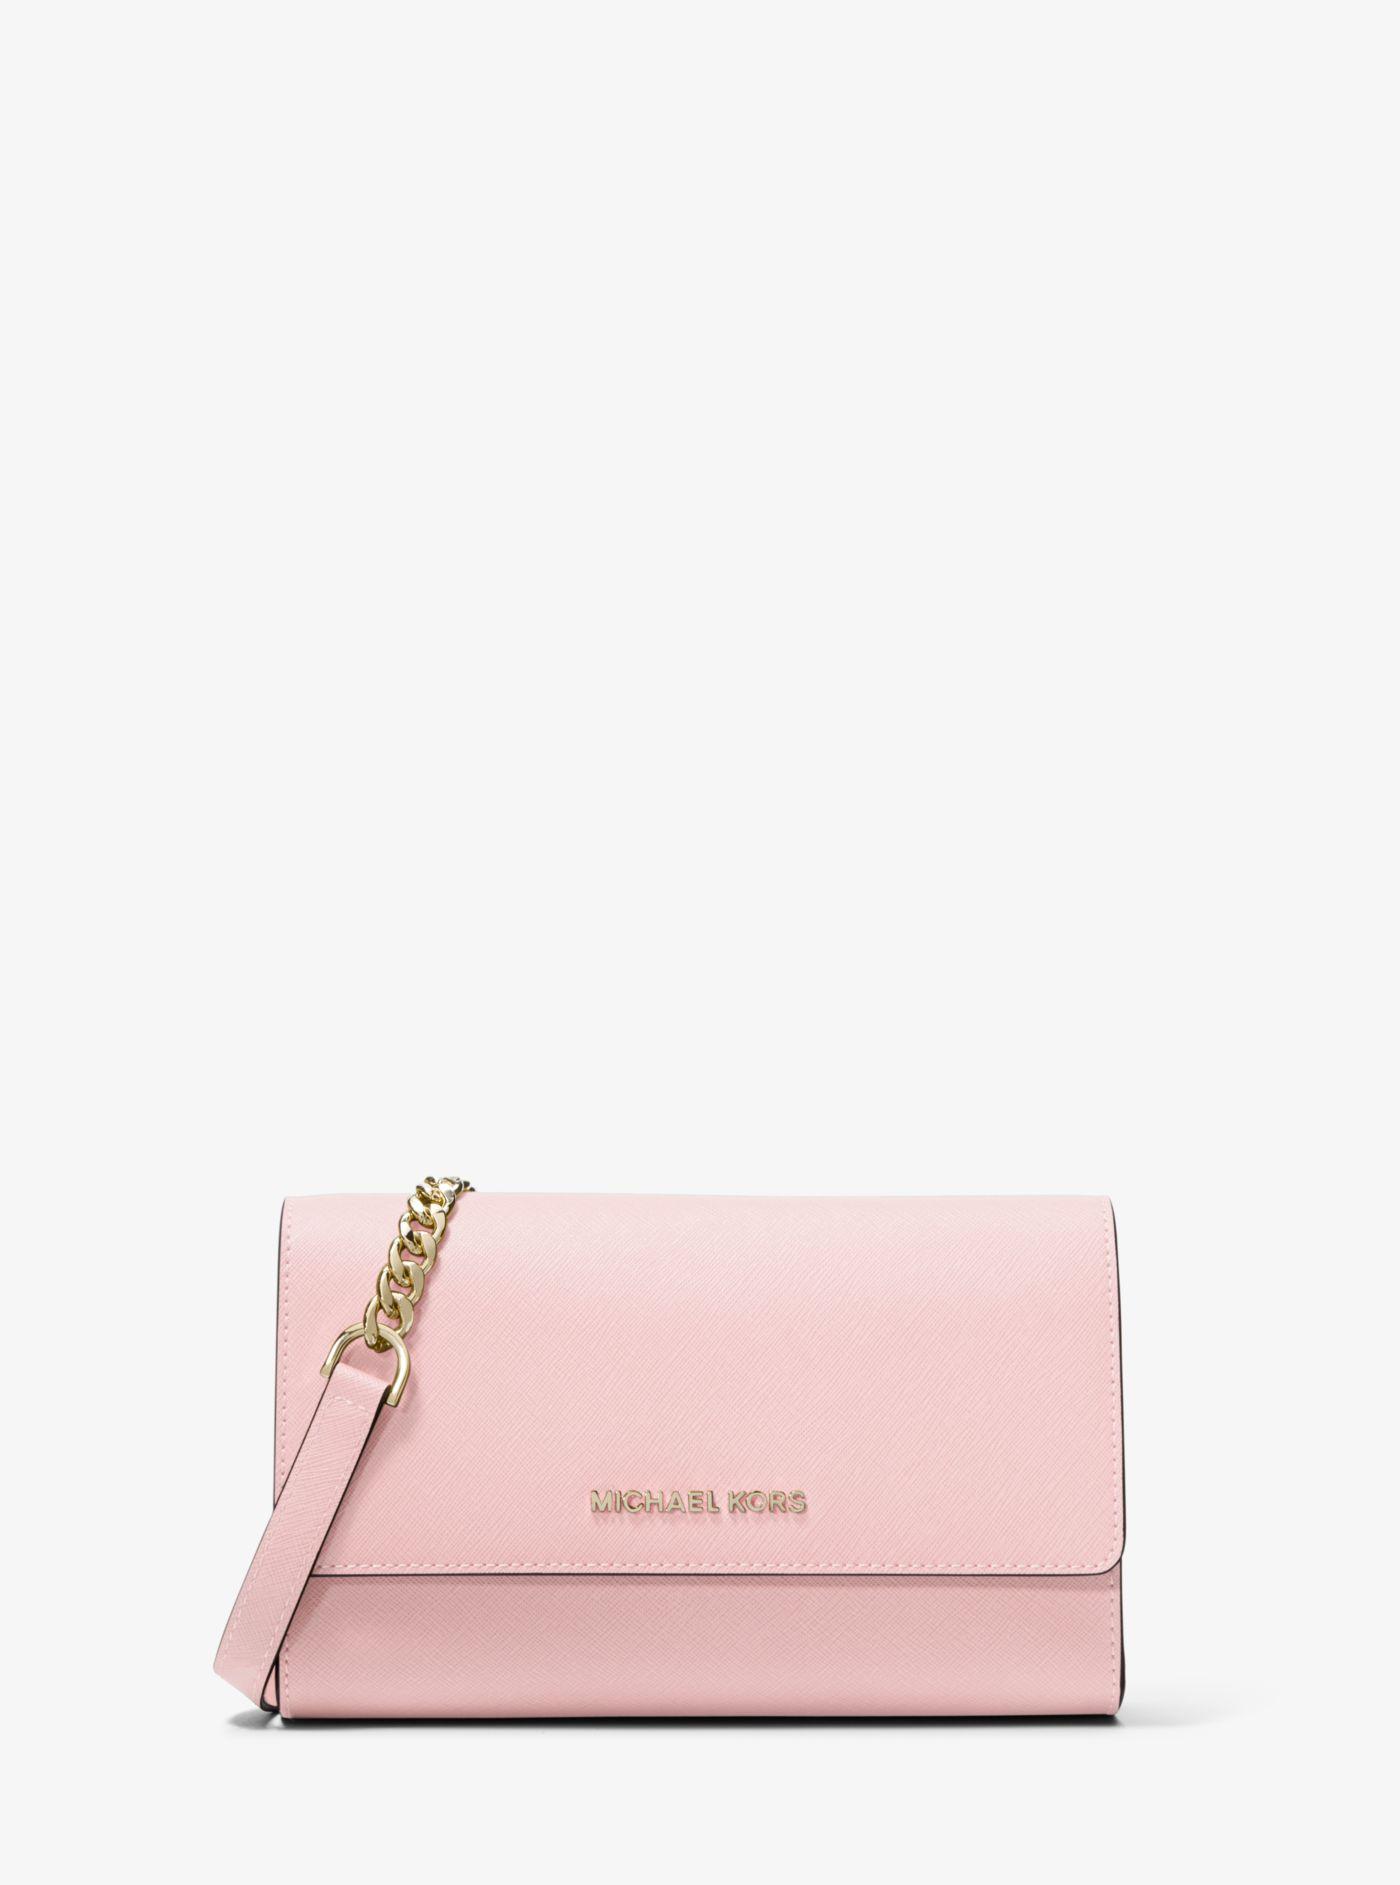 Michael Kors Saffiano Leather 3-in-1 Crossbody in Pink | Lyst